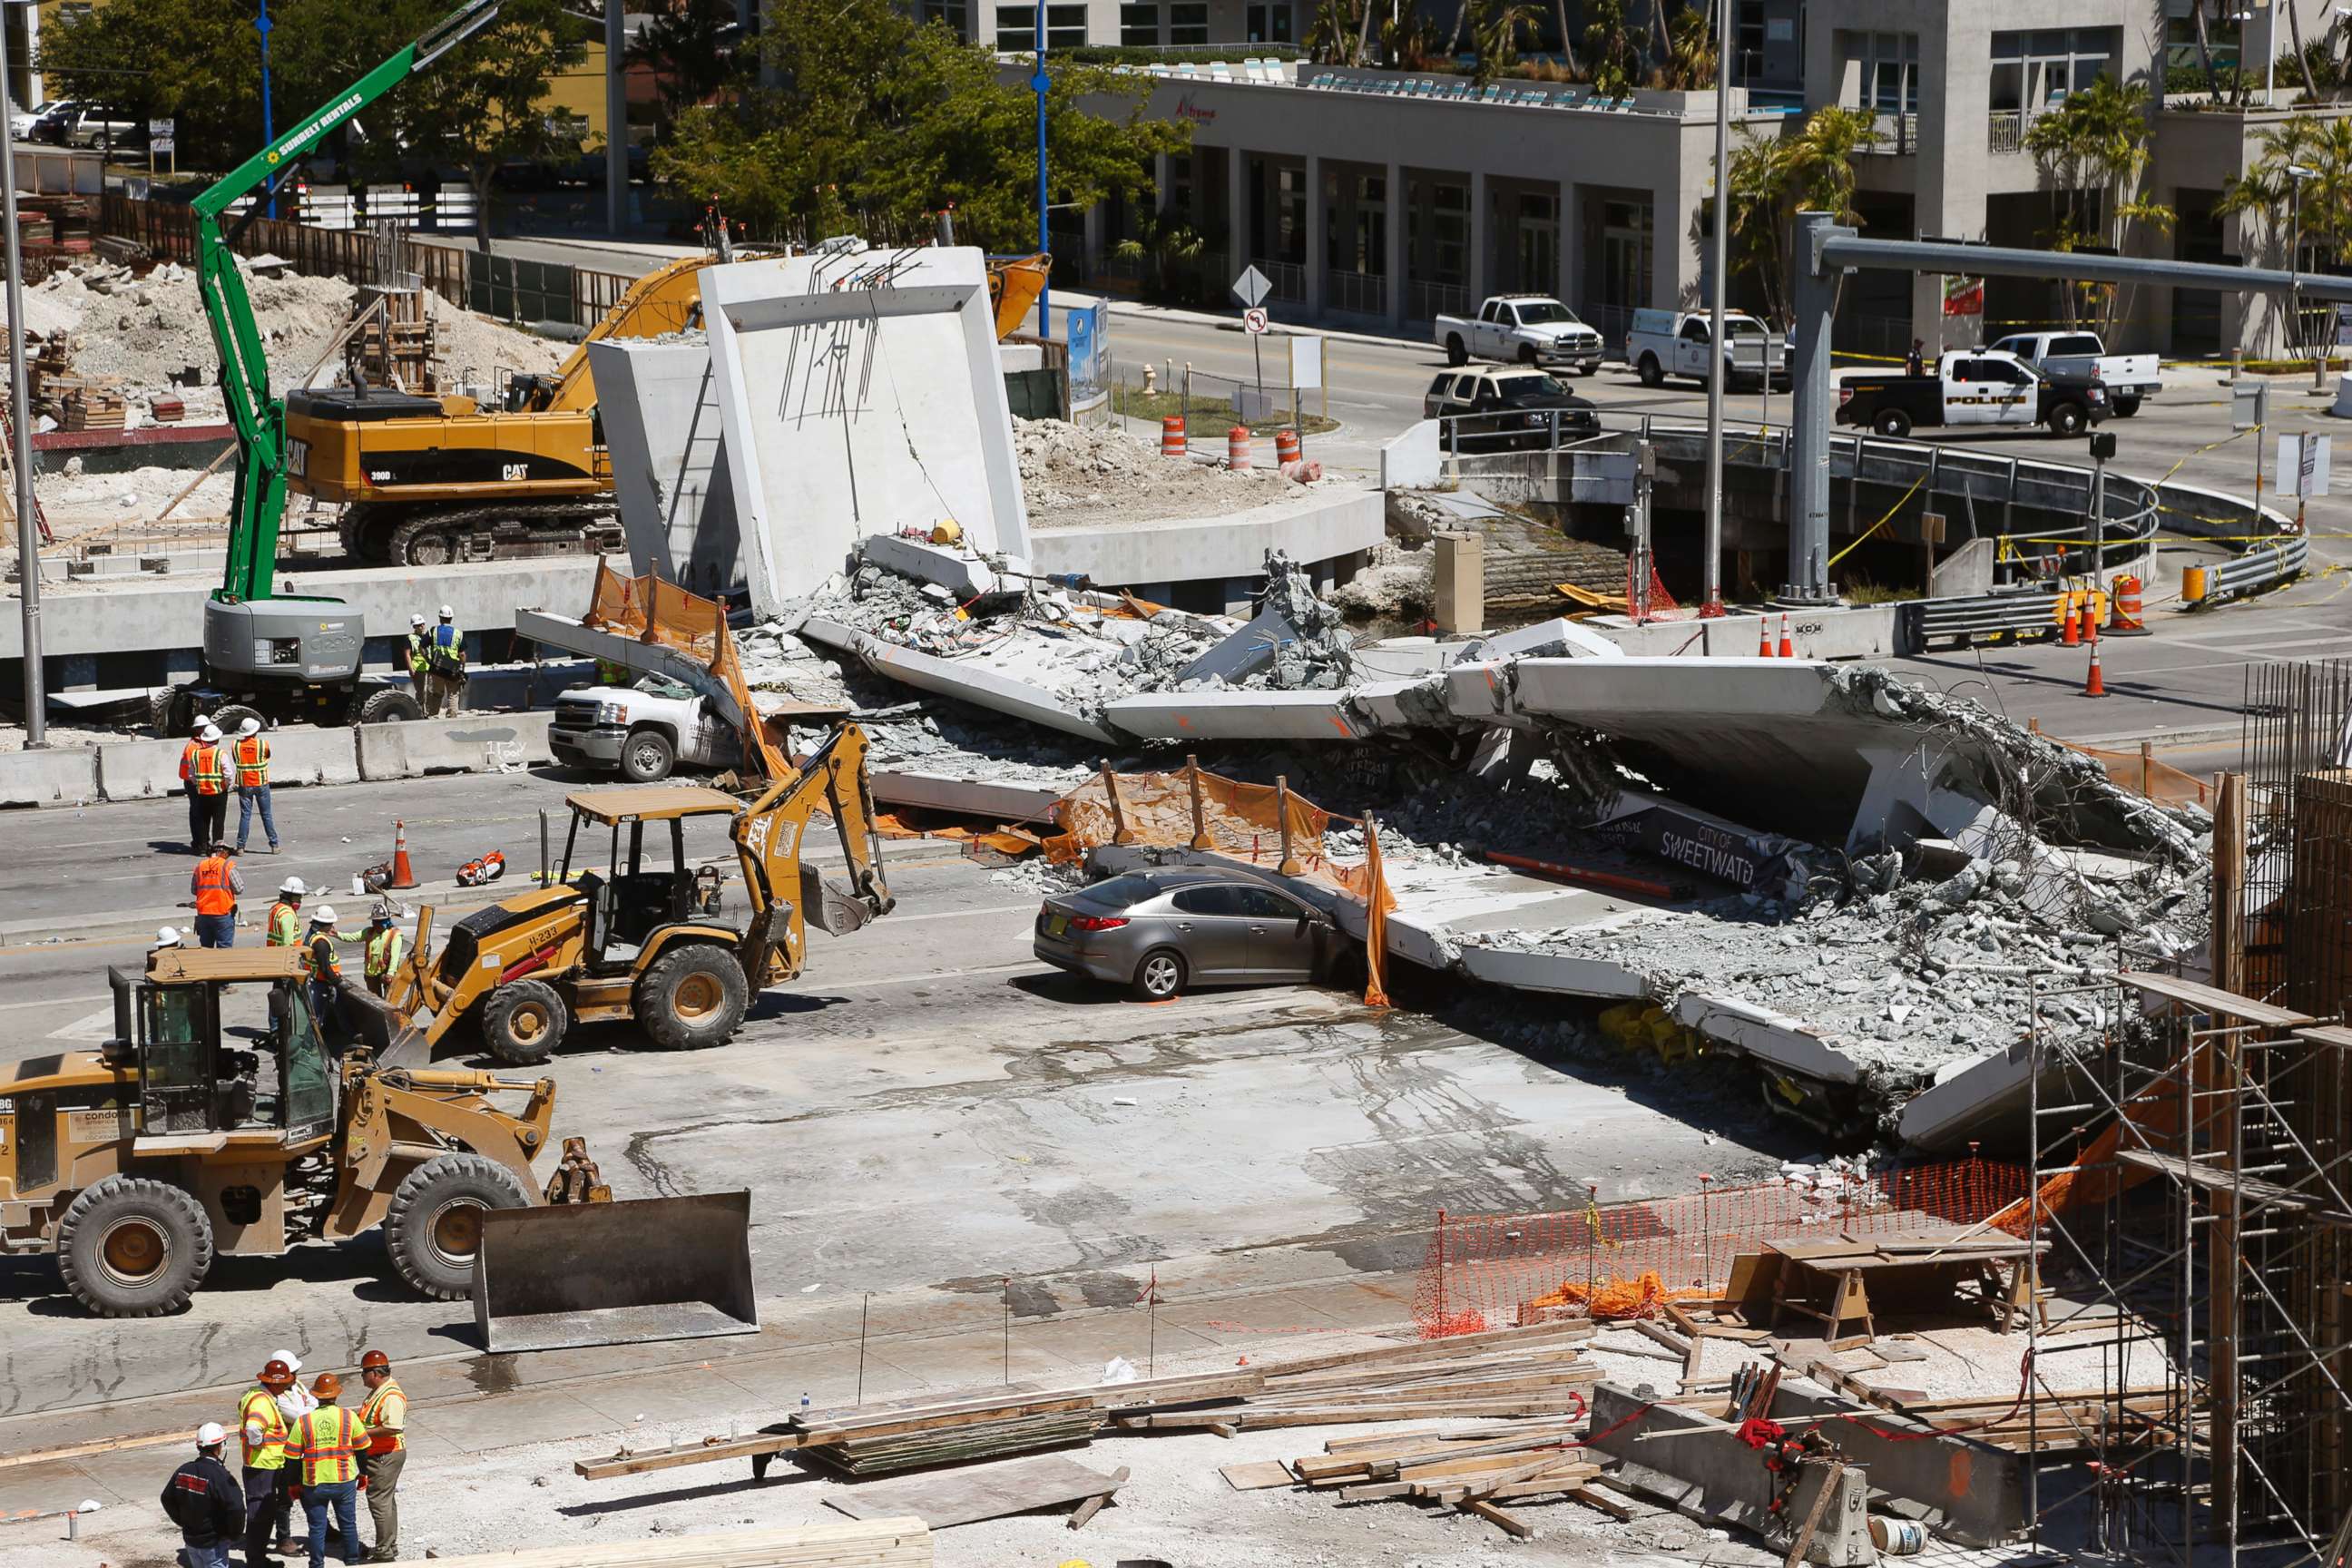 PHOTO: Crushed cars are shown under a section of a collapsed pedestrian bridge, March 16, 2018 near Florida International University in Miami.